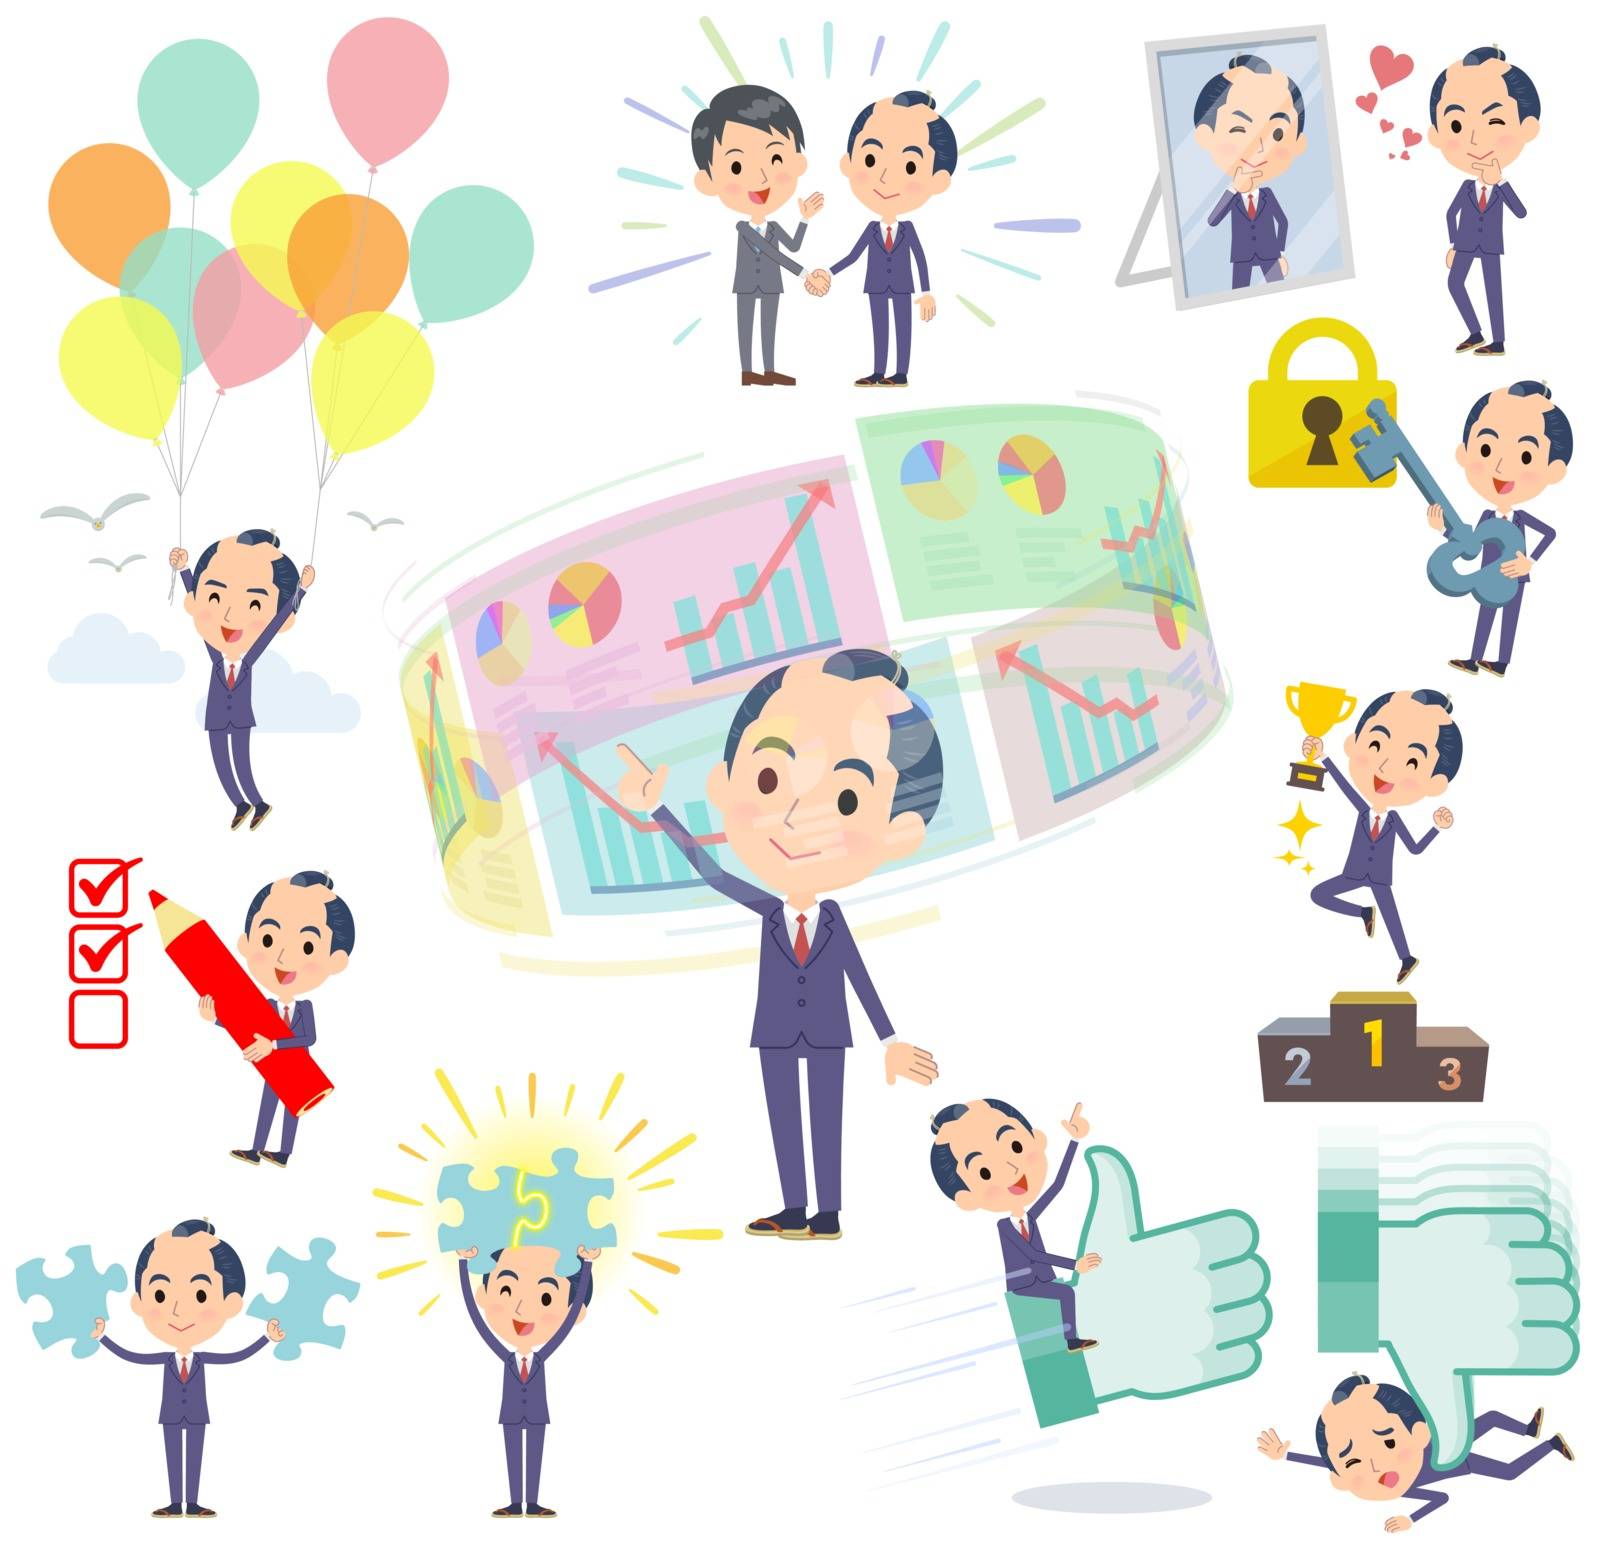 A set of businessman on success and positive.There are actions on business and solution as well.It's vector art so it's easy to edit.